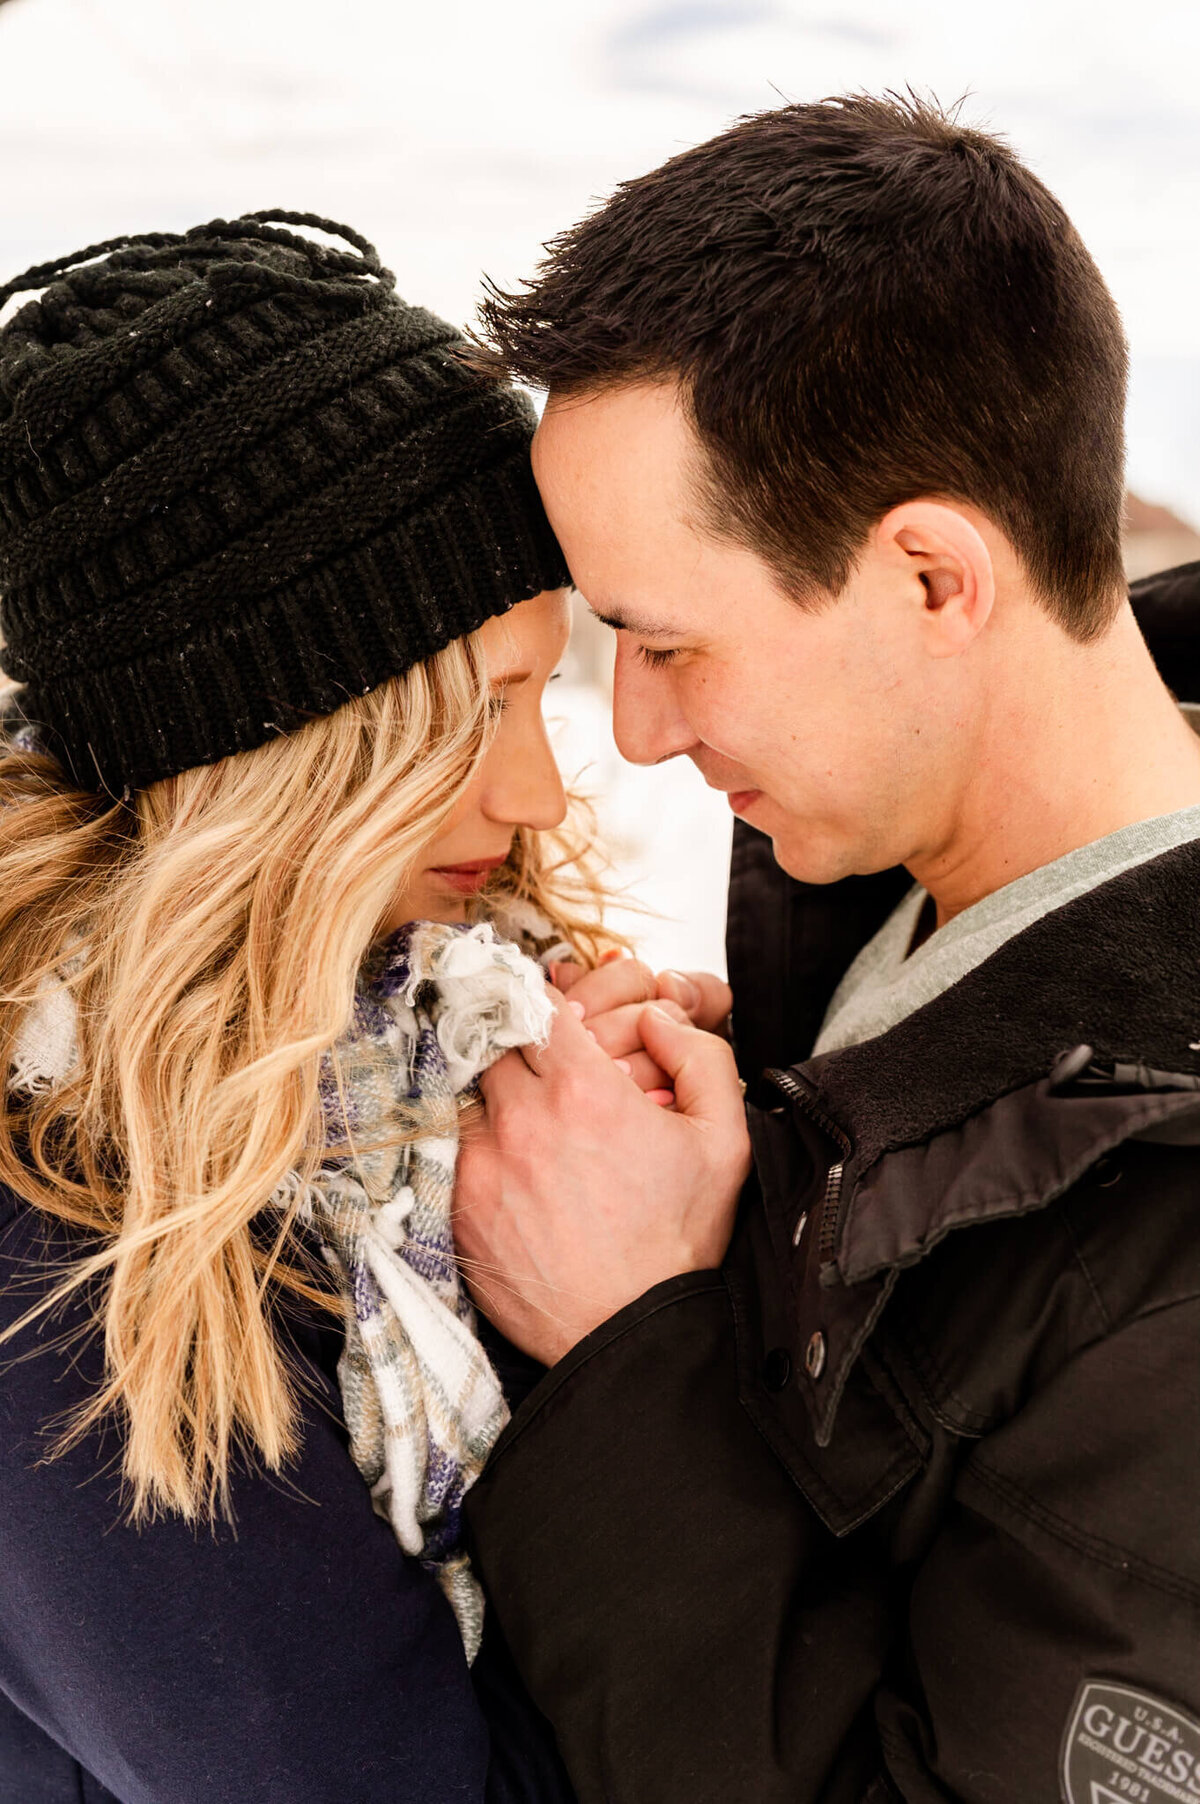 Man and woman warm each other up in the snow during a couples session near Chicago, IL.